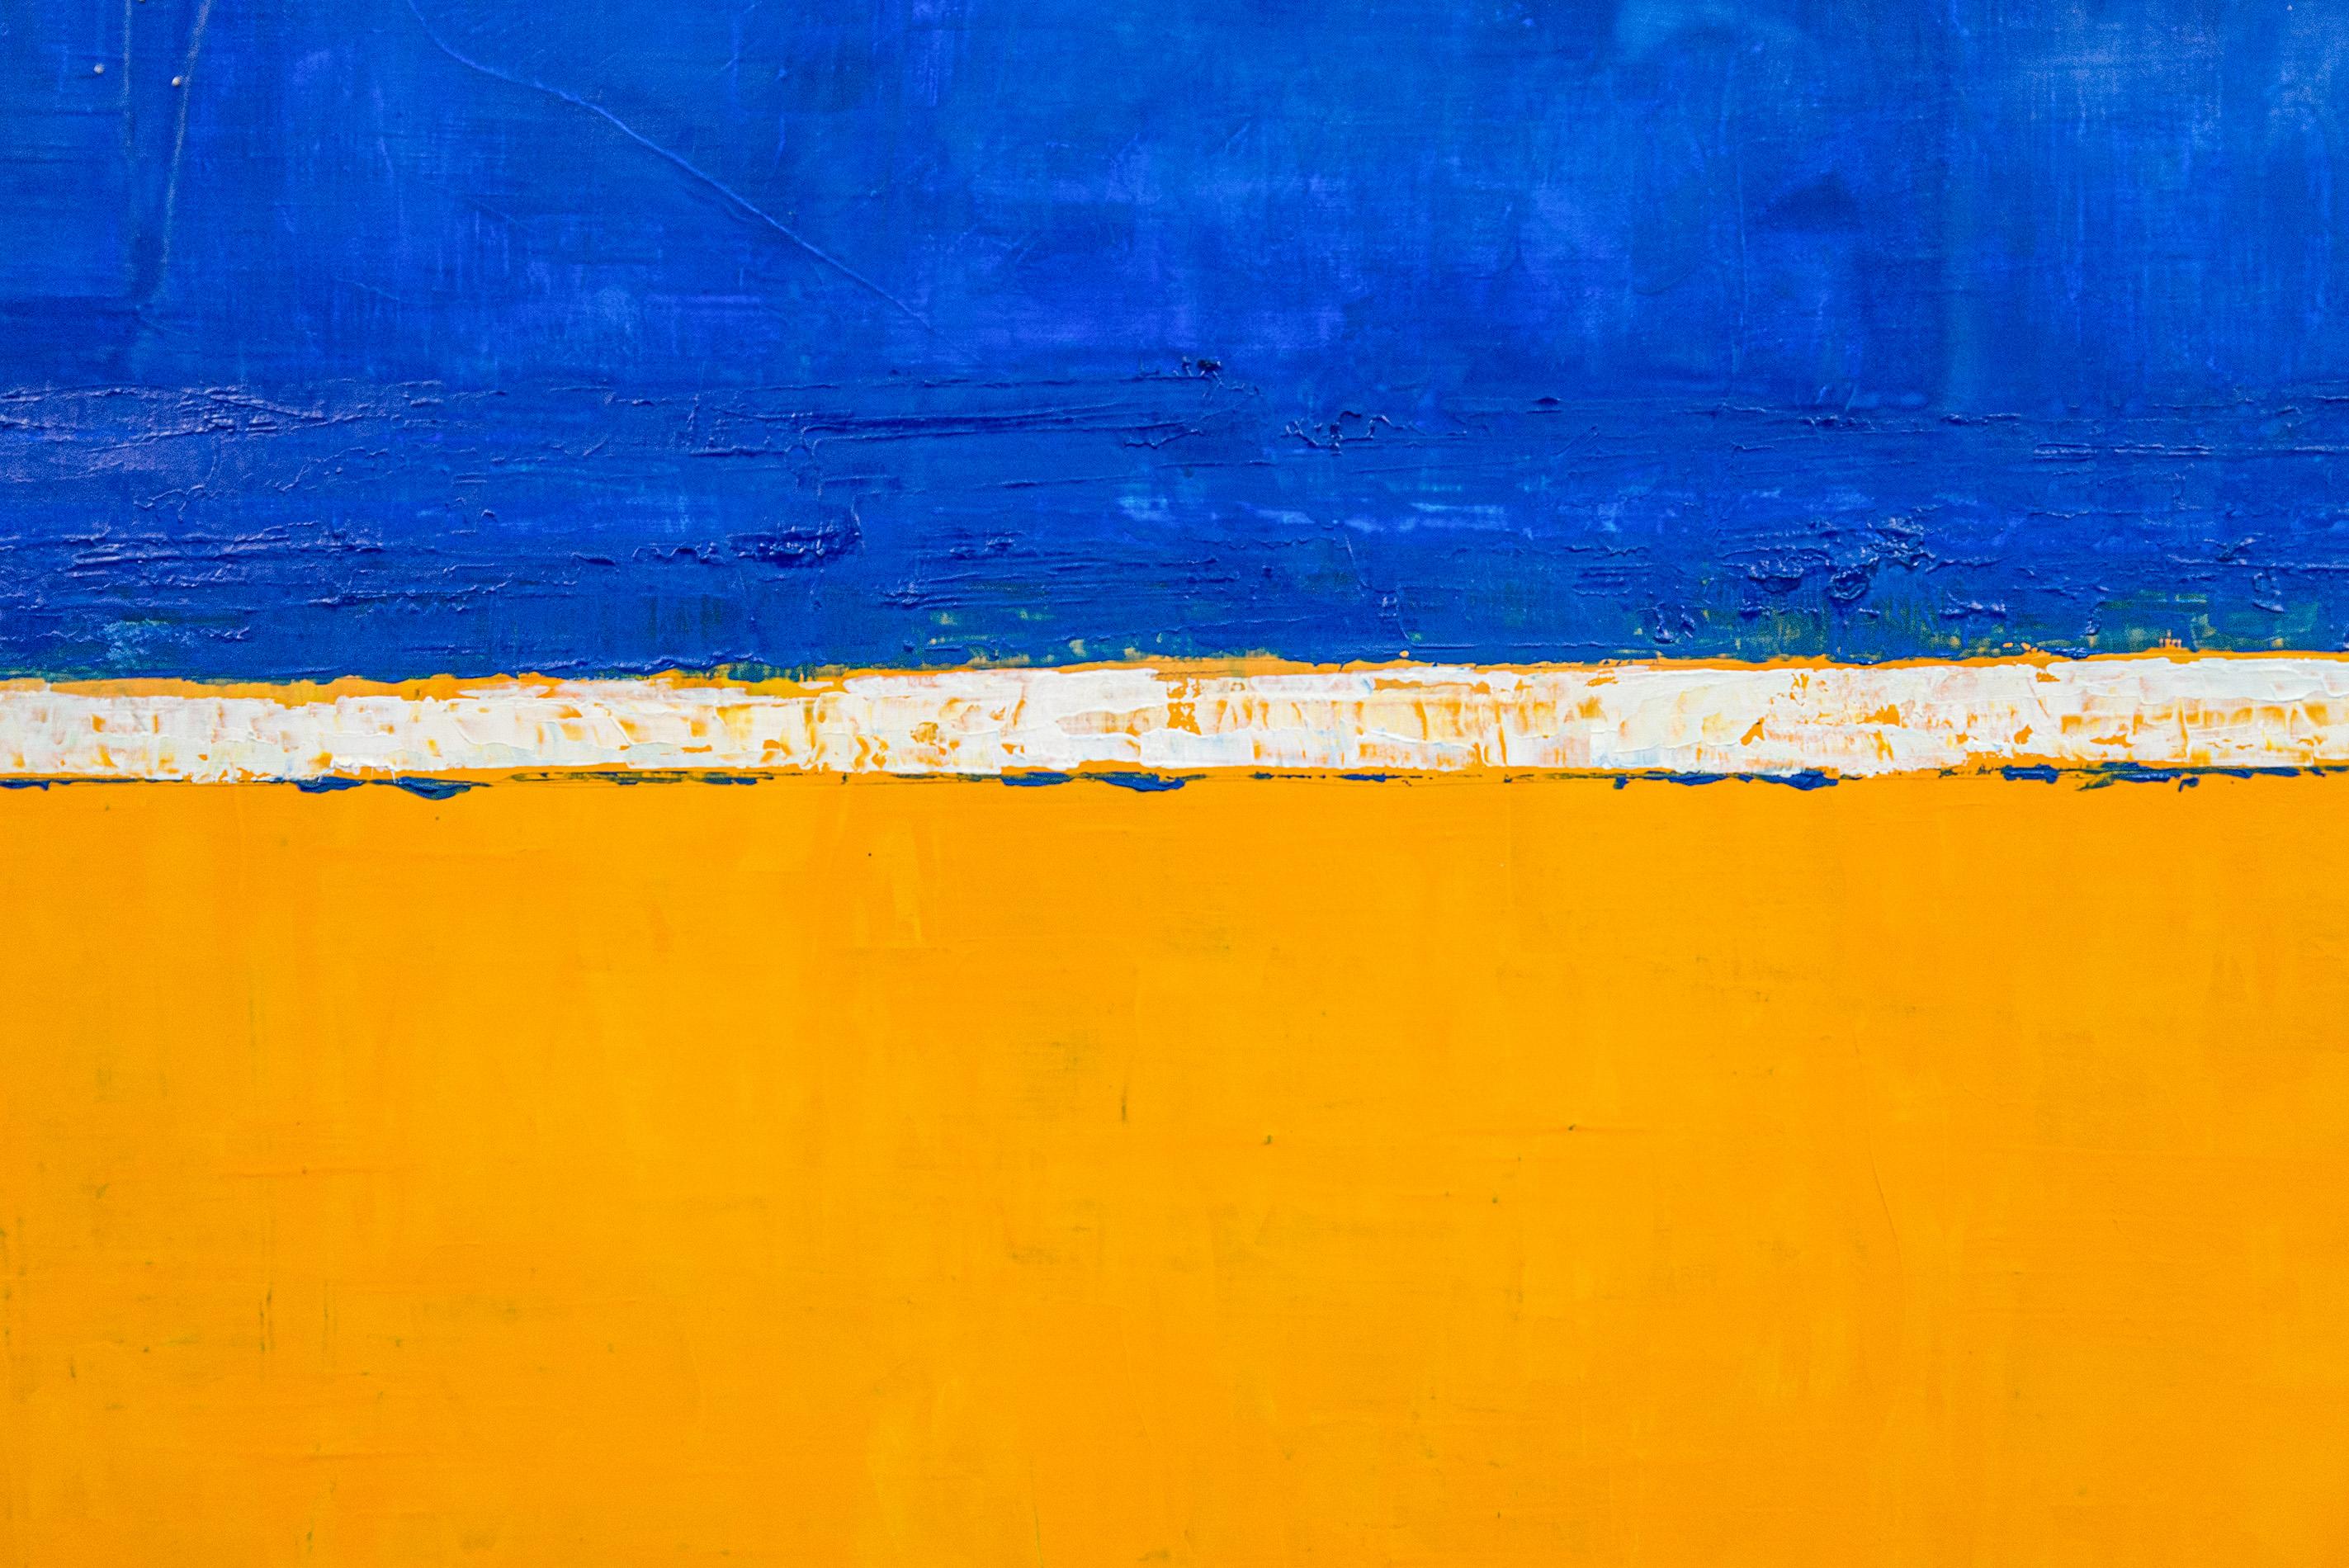 Blue Over Yellow #2 - bold, colourful, modern, abstract, oil on canvas - Contemporary Painting by David Sorensen